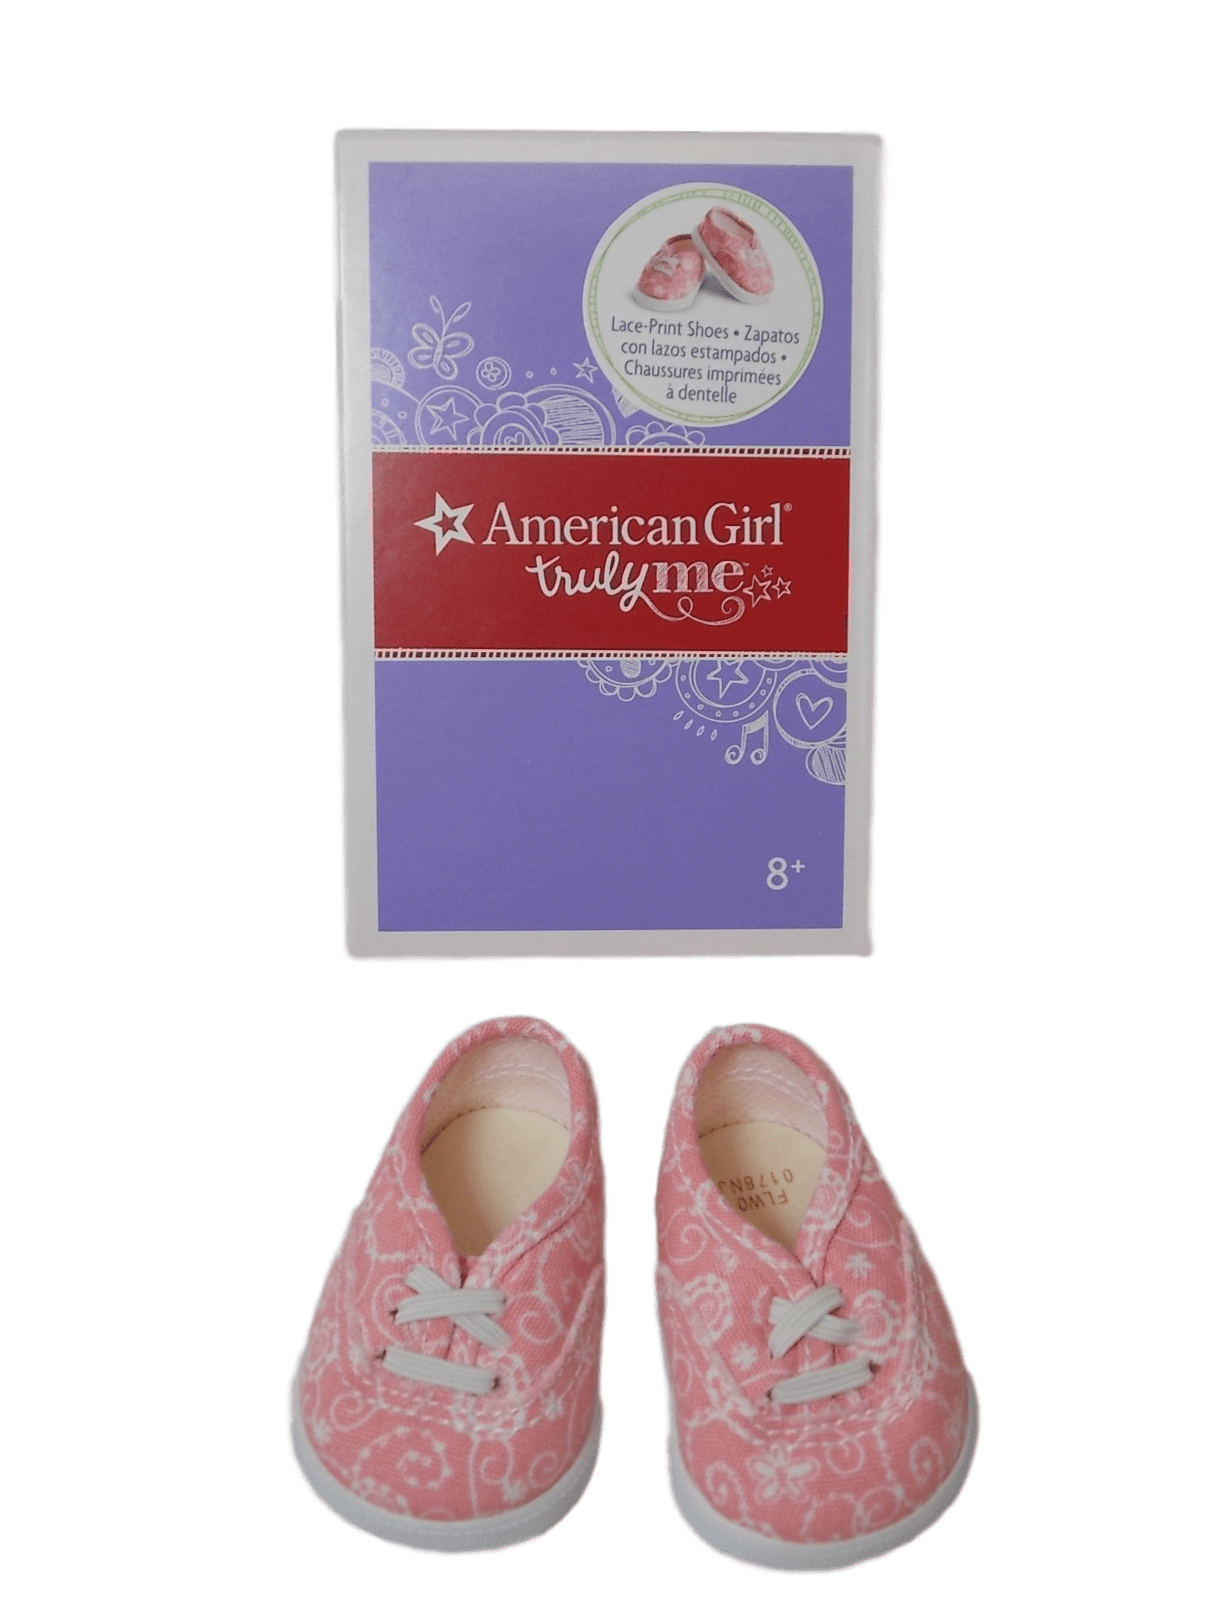 Variety of Doll Flats Shoes for American Girl and other 18" dolls